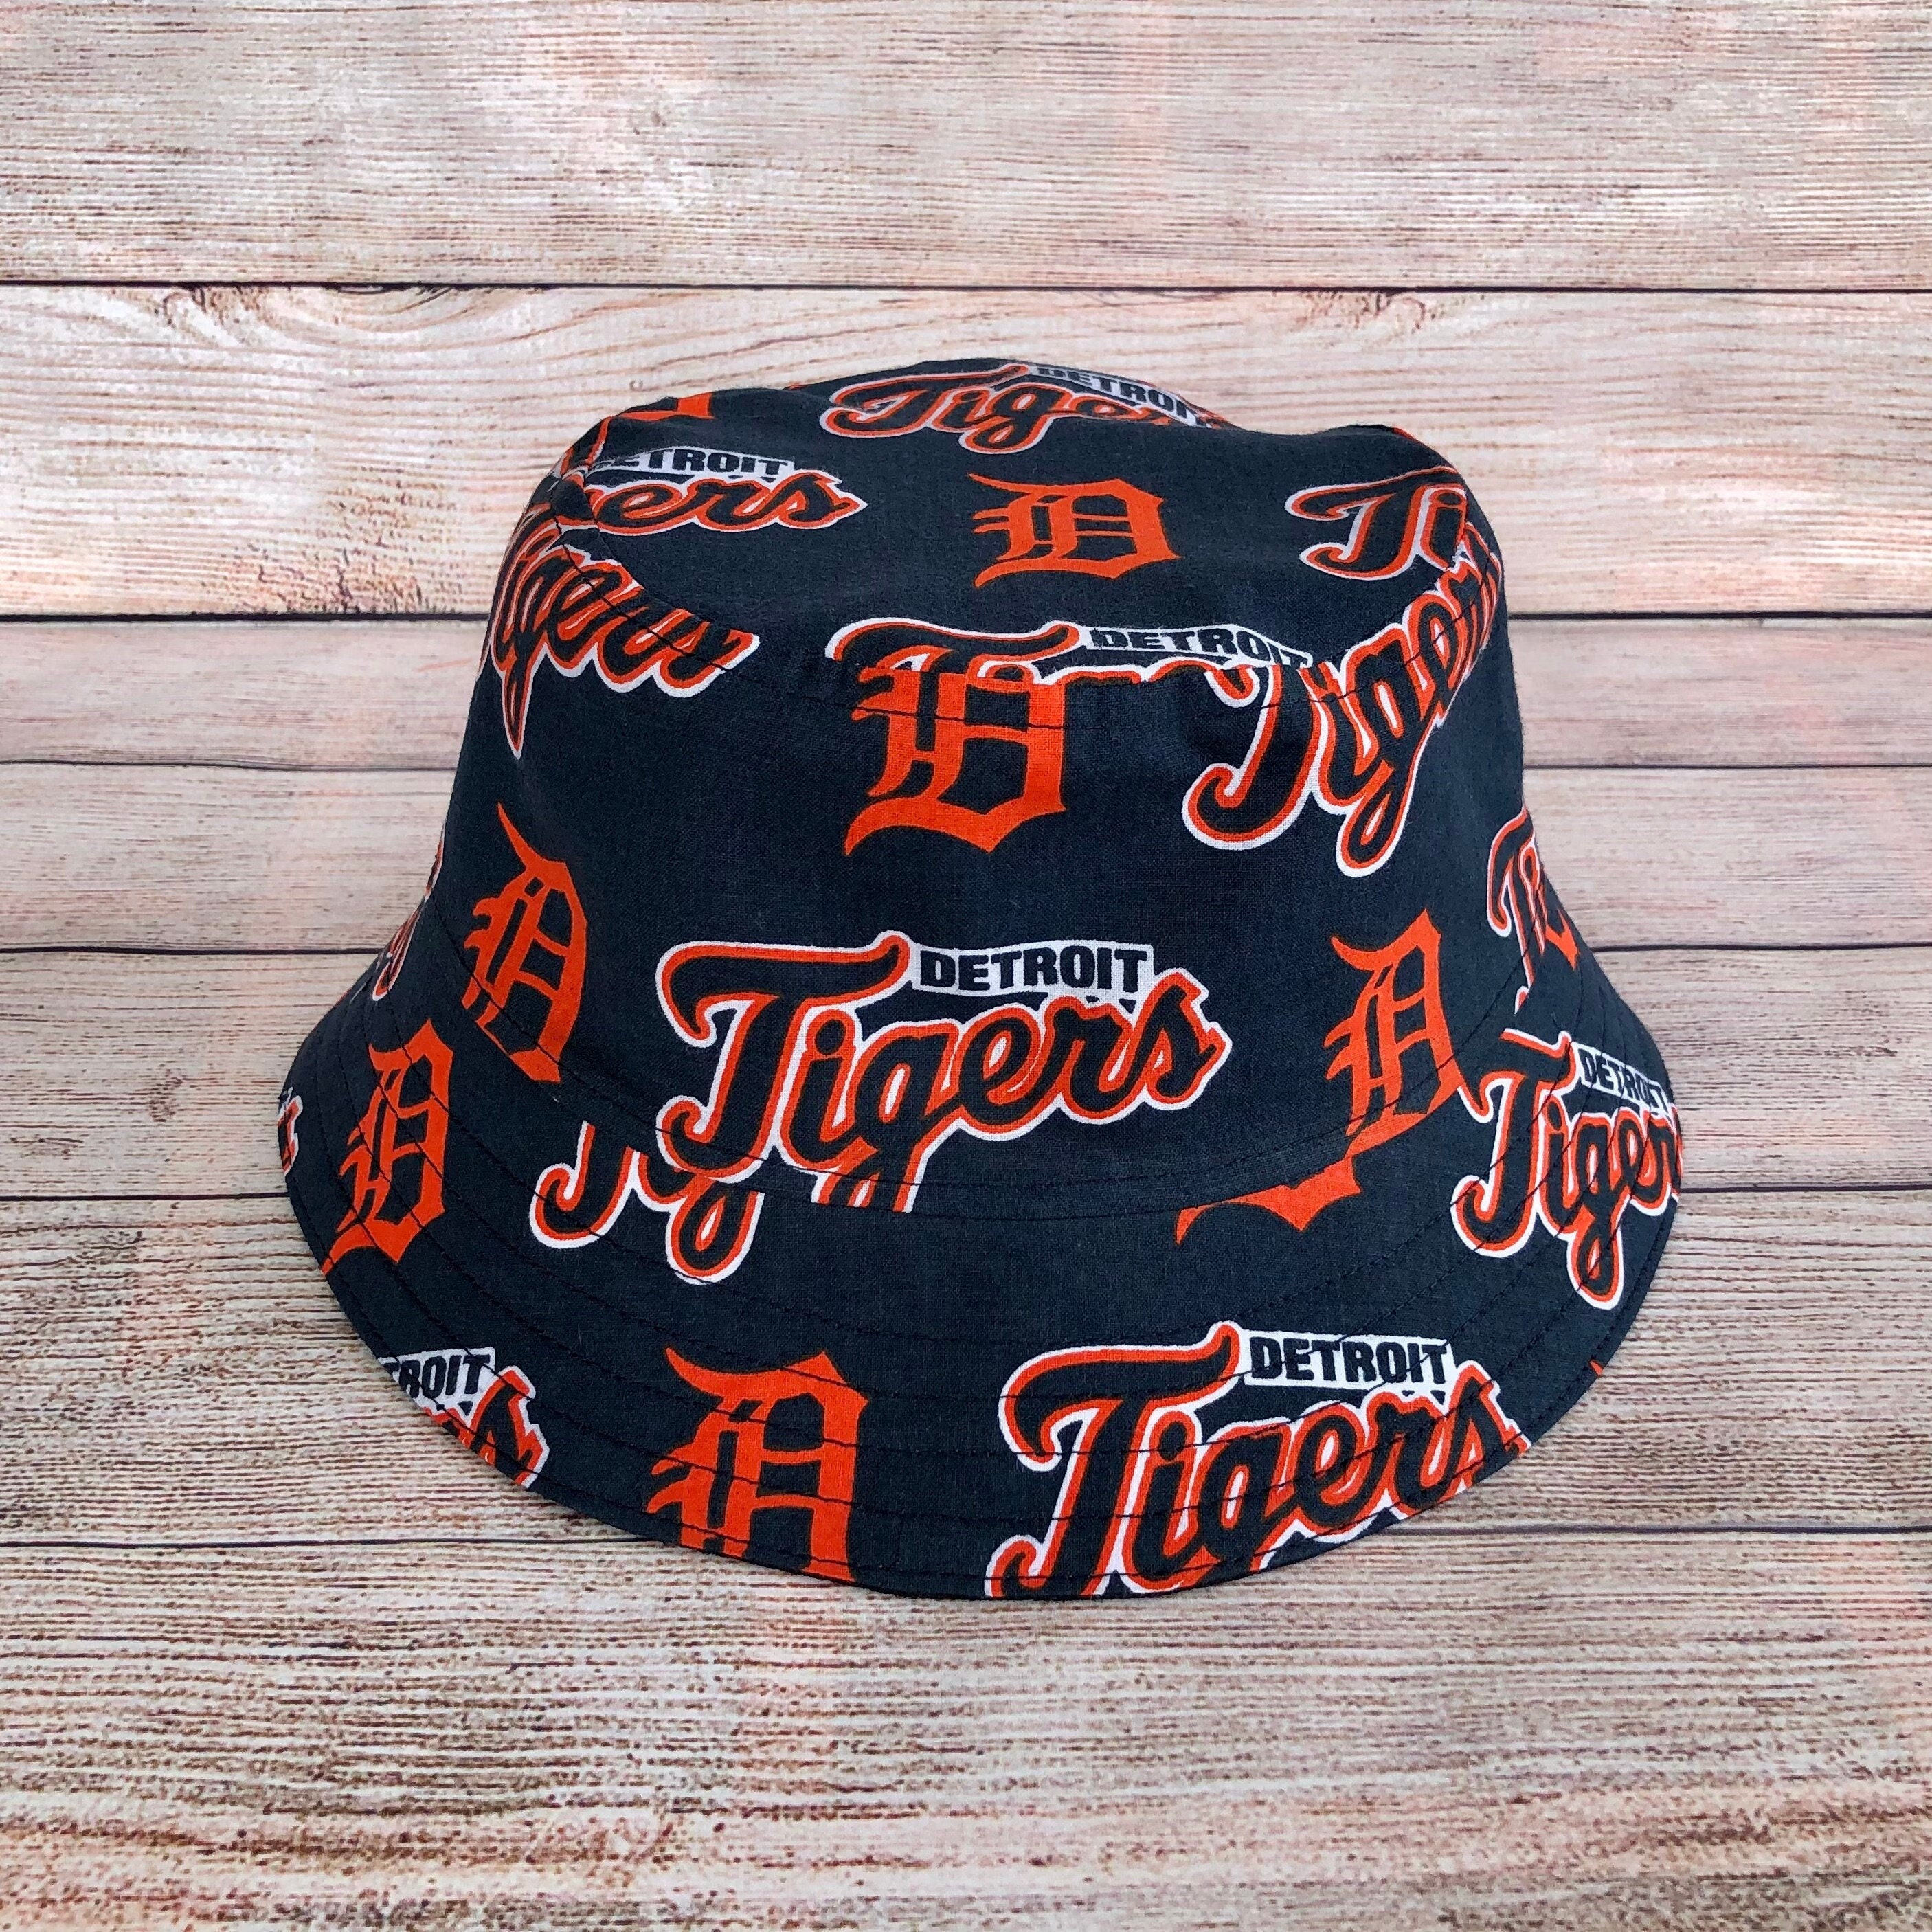 Adult Bucket Hat - Detroit Tigers, MLB Sports Team, Baseball Bucket Hat, Baseball Fan Hat, Baseball Gift, Gift for Him, Unisex, One Size Hat